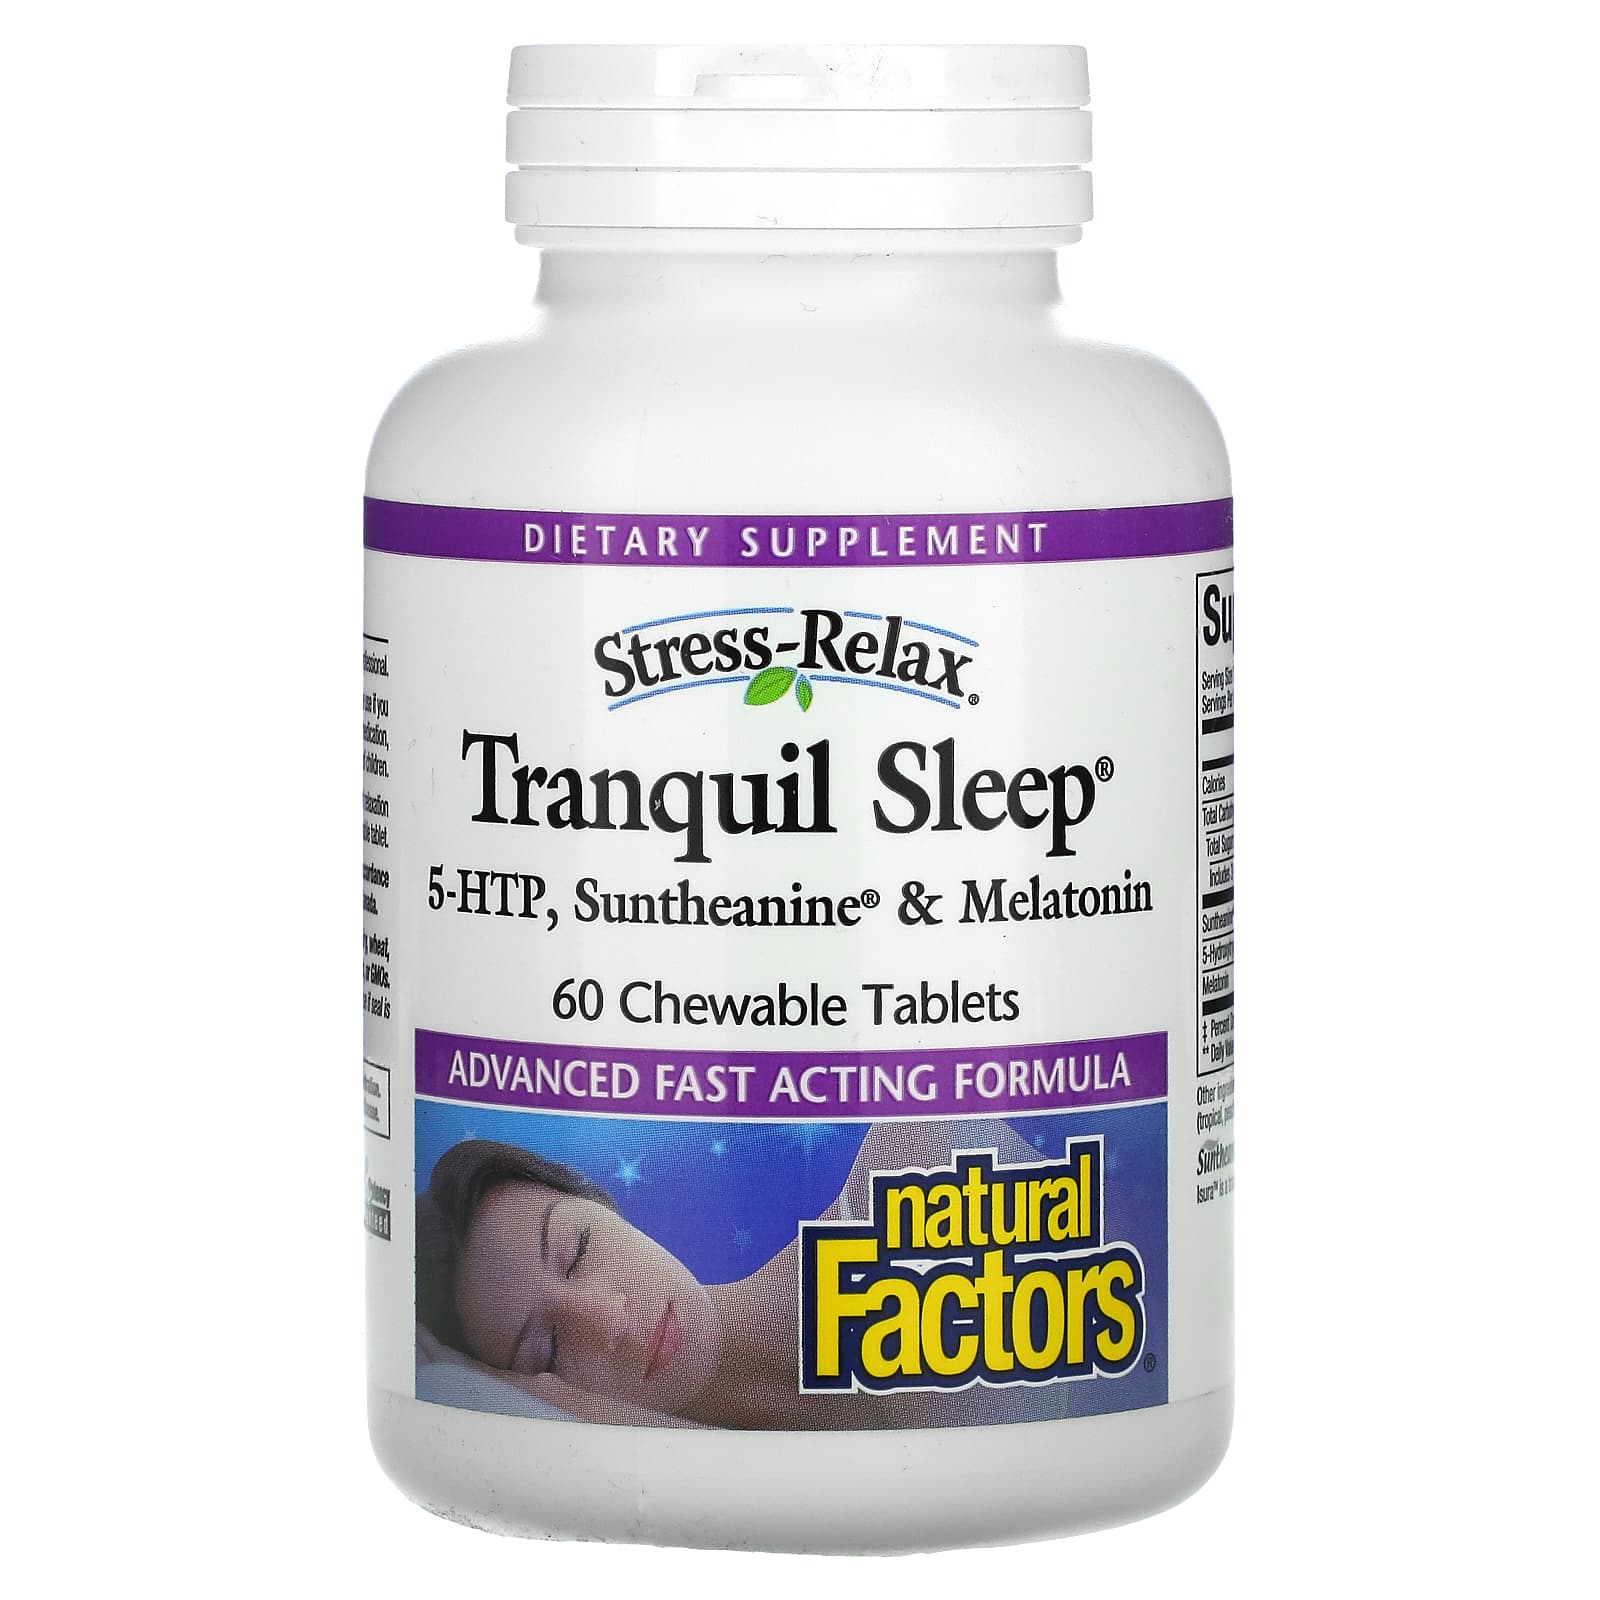 Natural Factors Stress Relax Tranquil Sleep Chewable Tropical